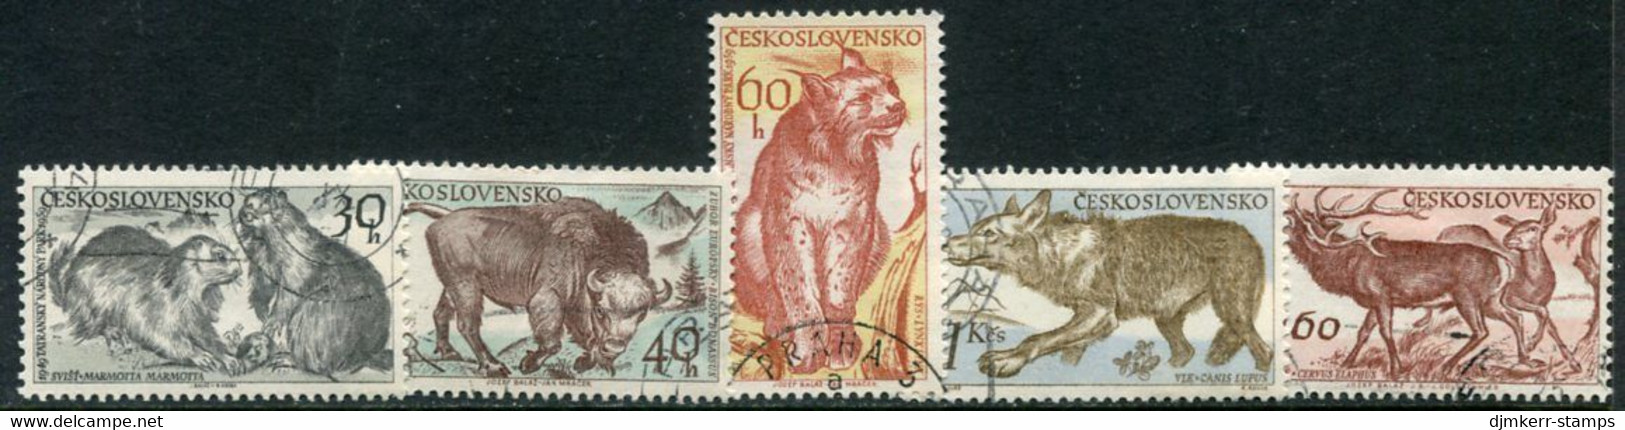 CZECHOSLOVAKIA 1959 Tatra Nature Reserve Used.  Michel 1153-57 - Used Stamps